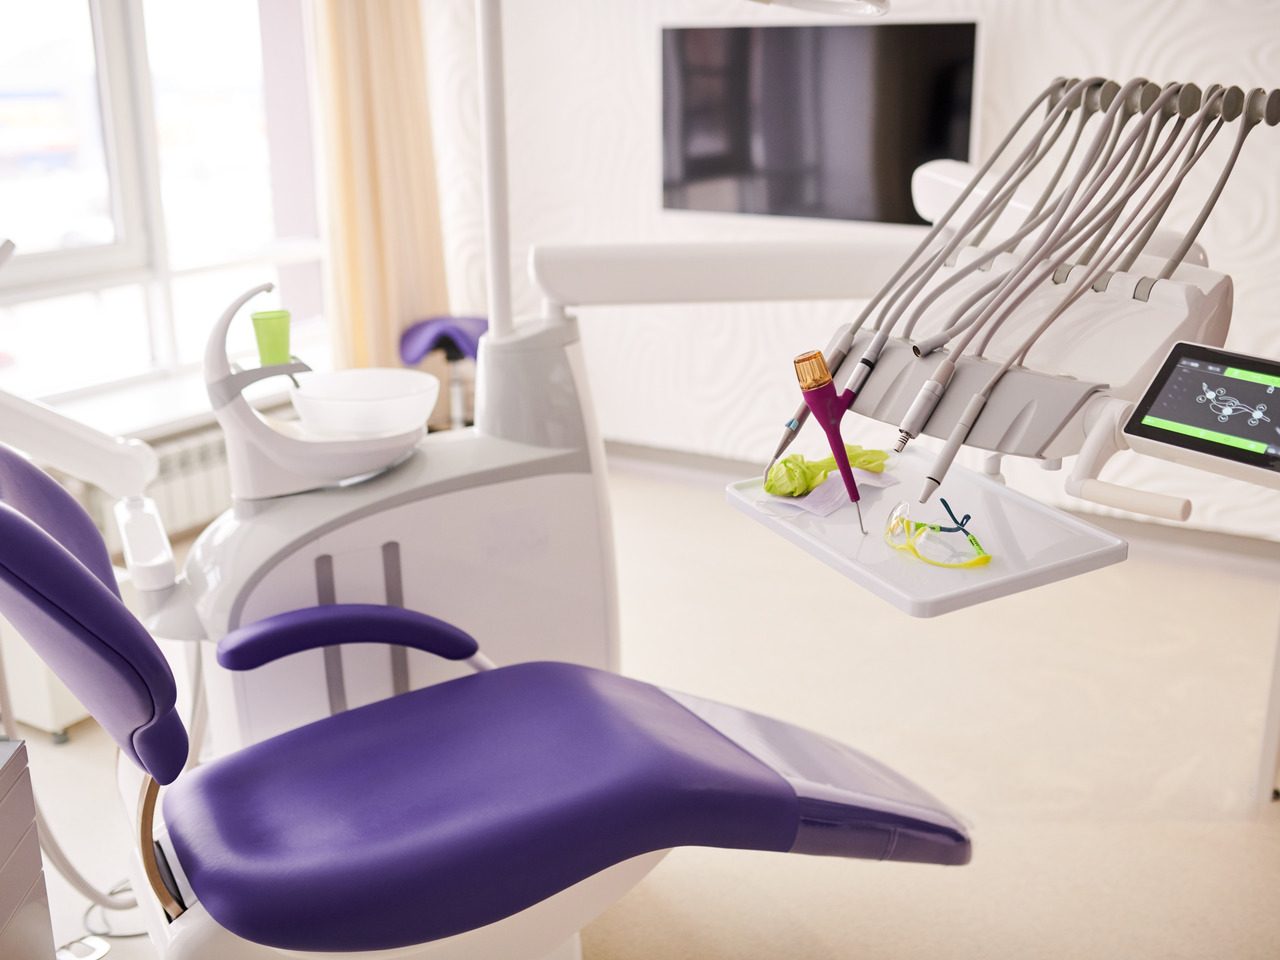 Background image of empty dentists office with purple dental chair, copy space